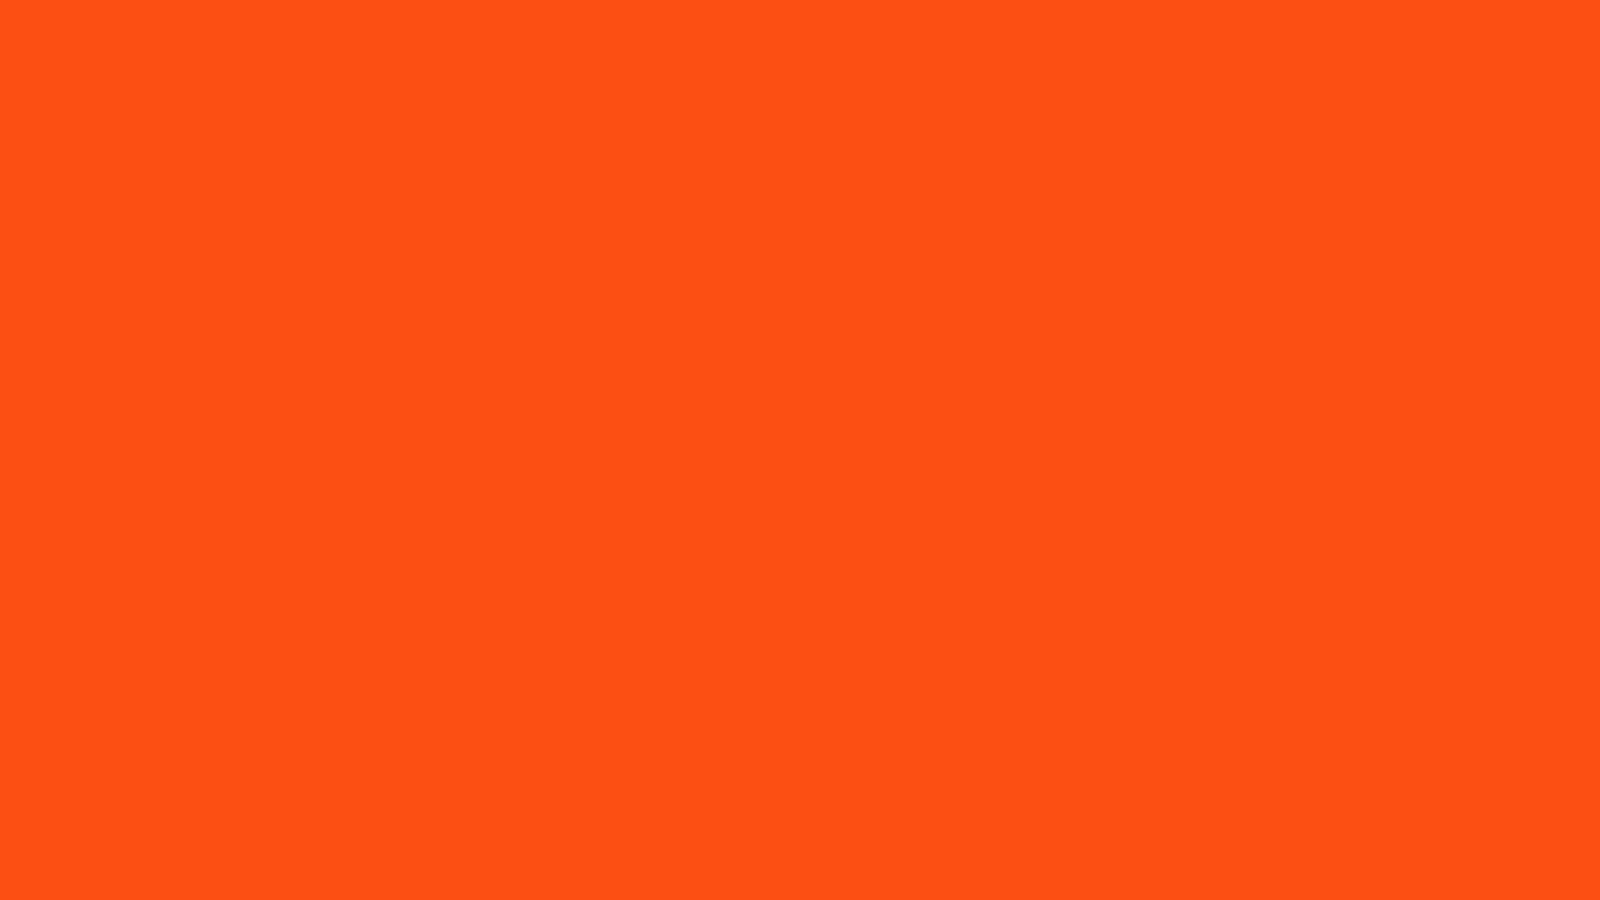 Orange Solid Color Background And The Below